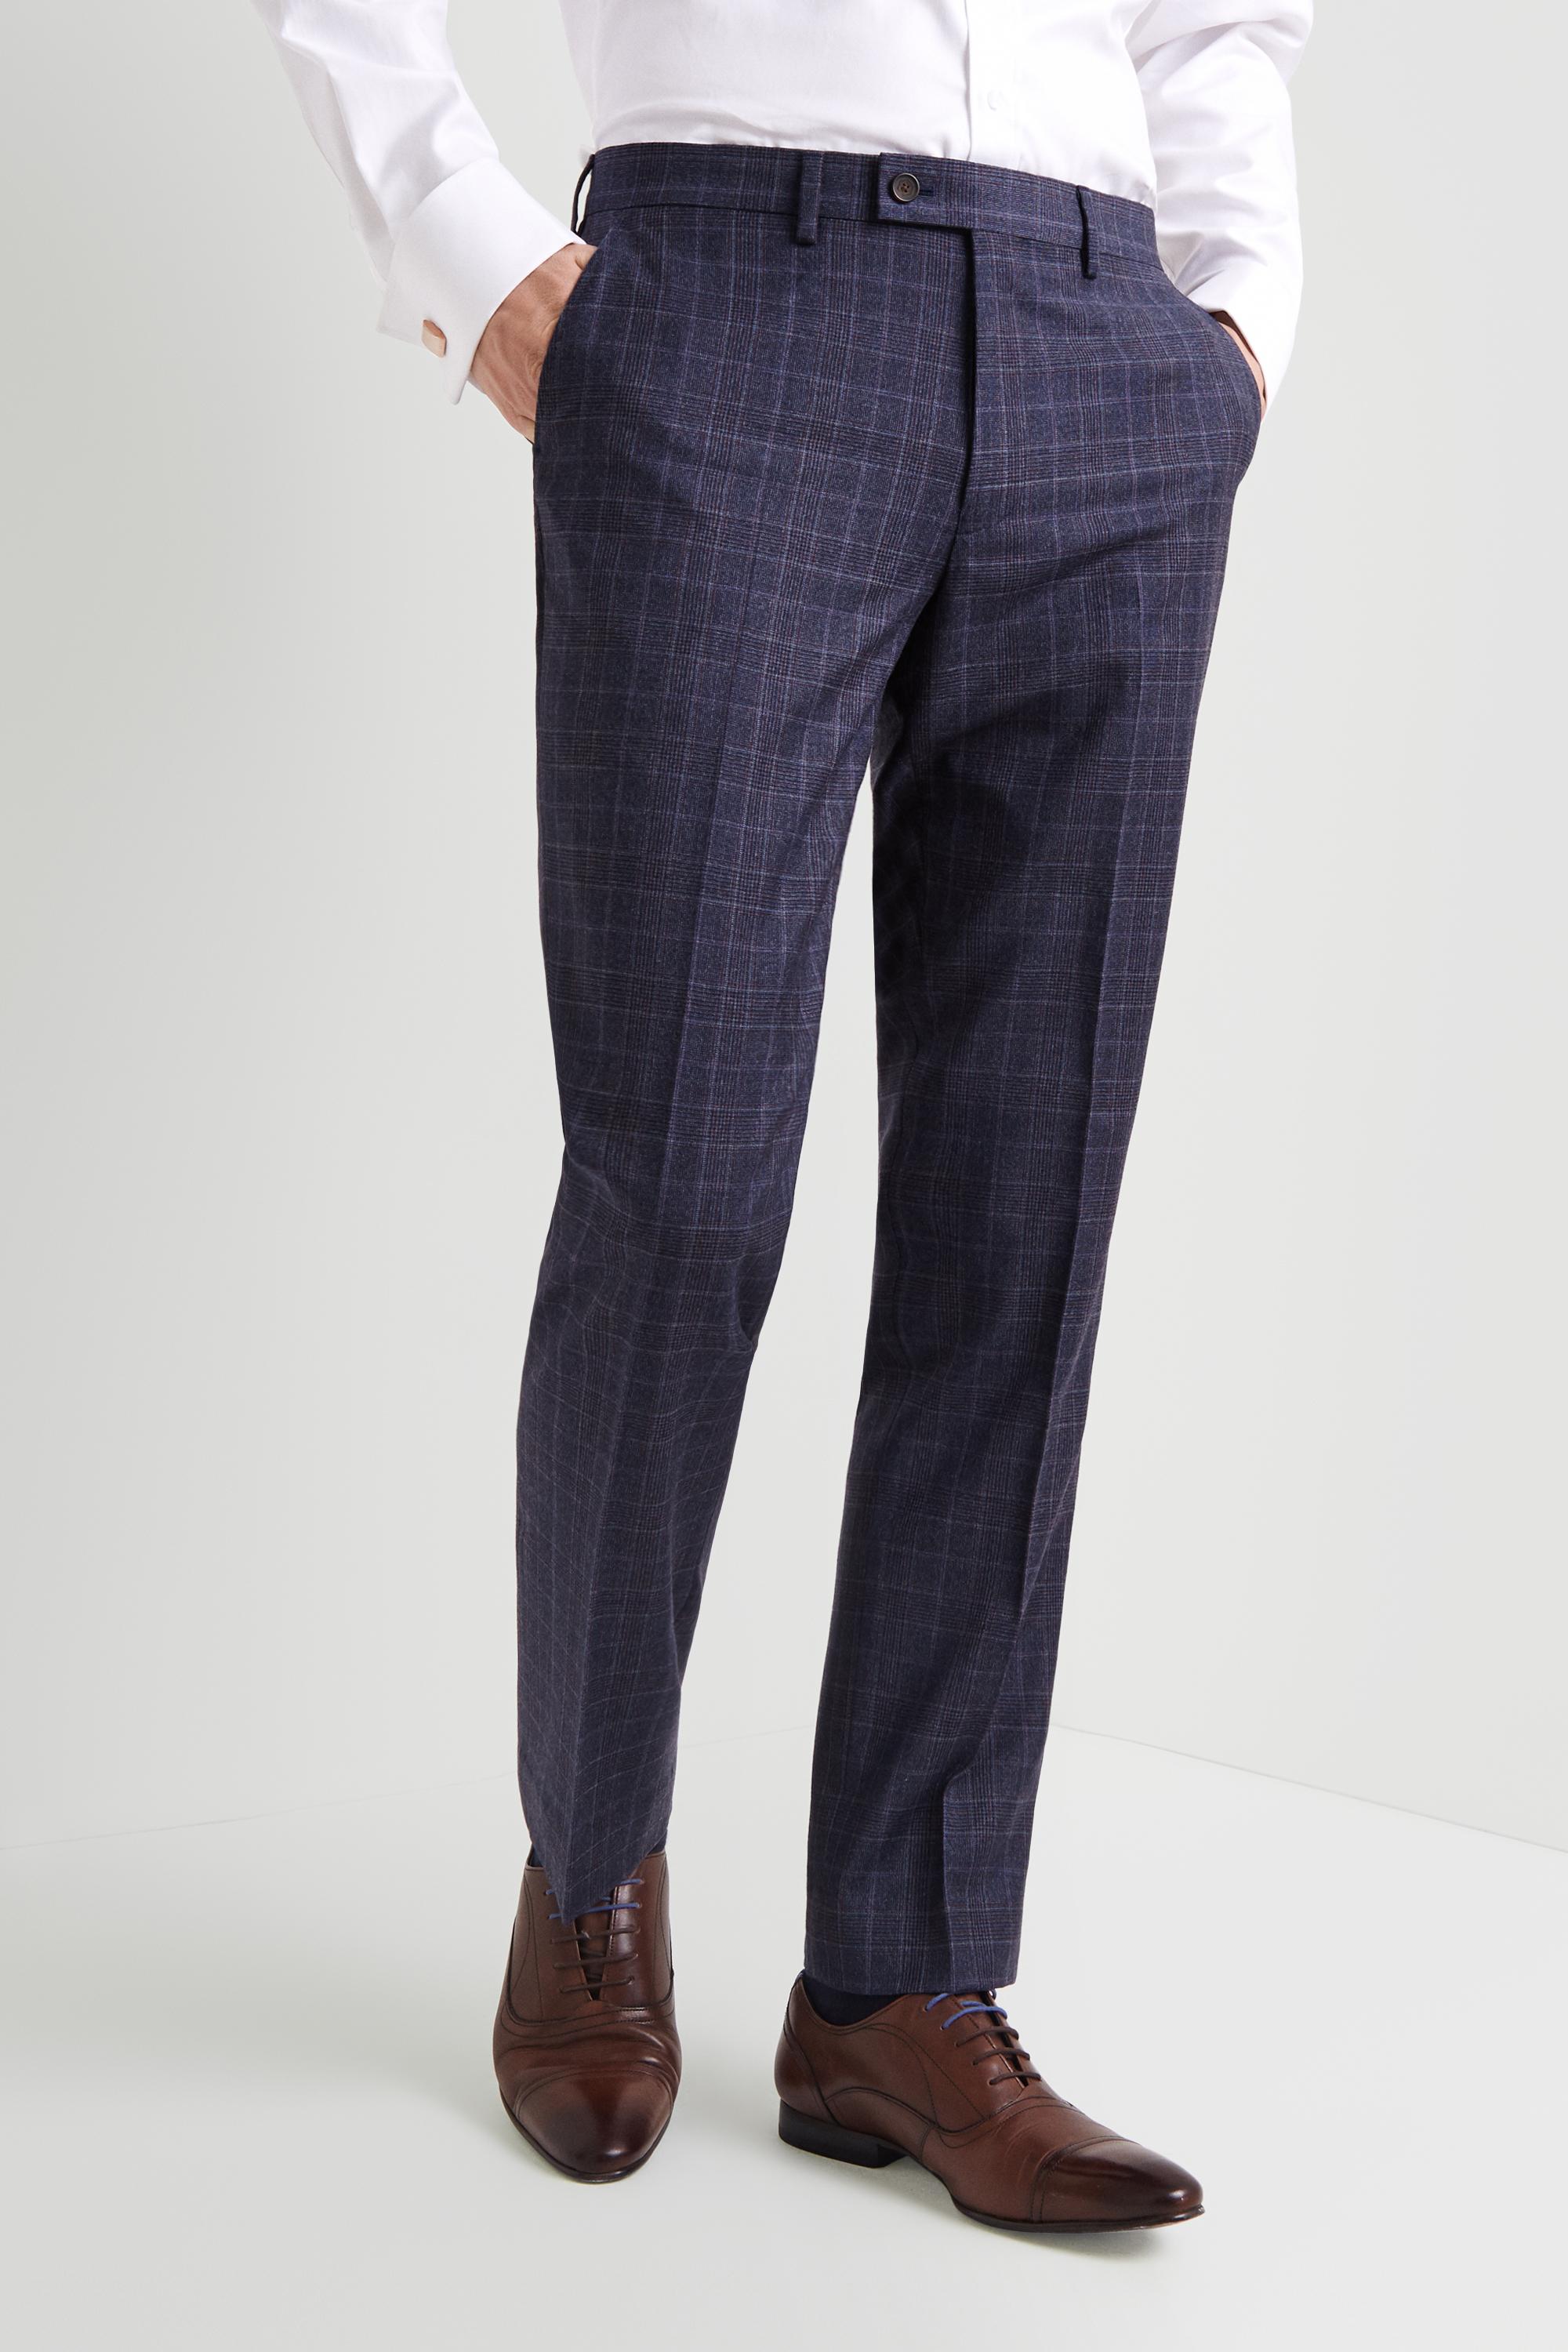 Ted Baker Wool Gold Tailored Fit Blue With Plum Check Trousers in ...